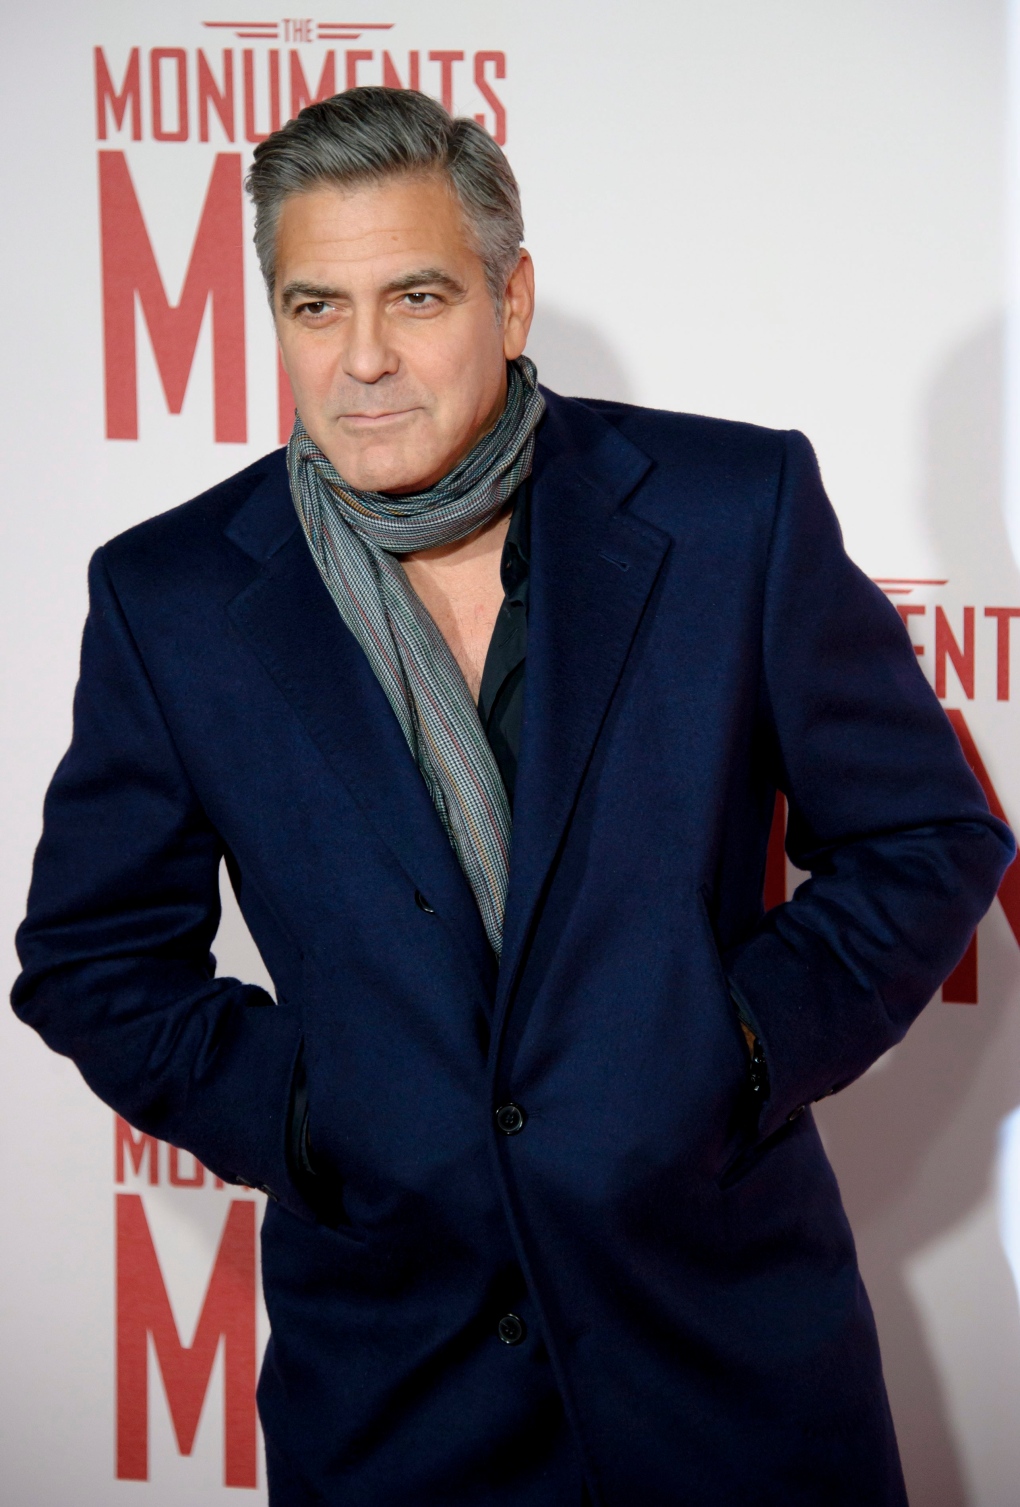 Clooney engaged to girlfriend